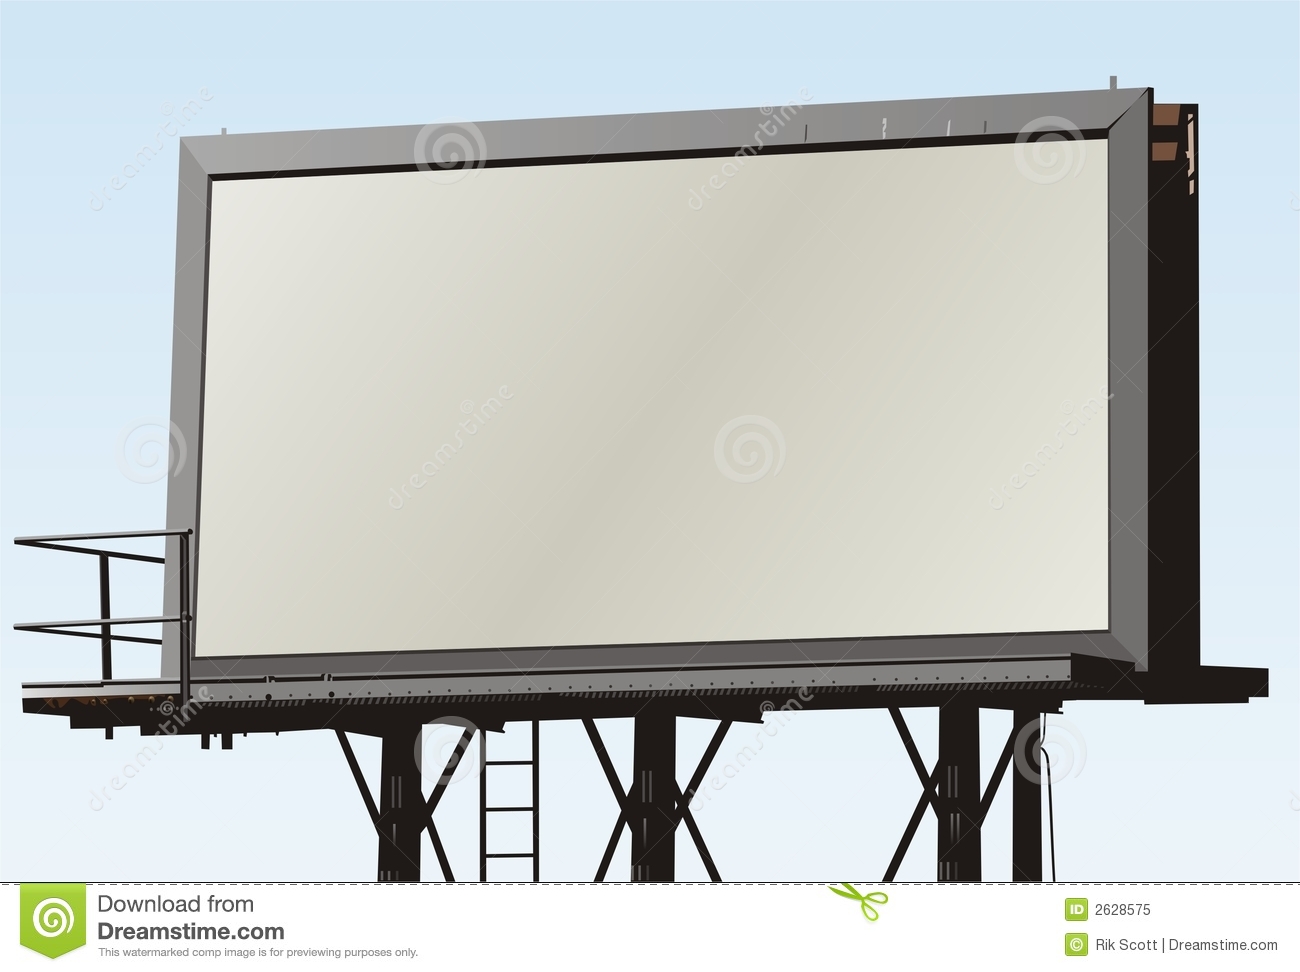 Illustration Of A Large Outdoor Billboard With Space For Custom Text